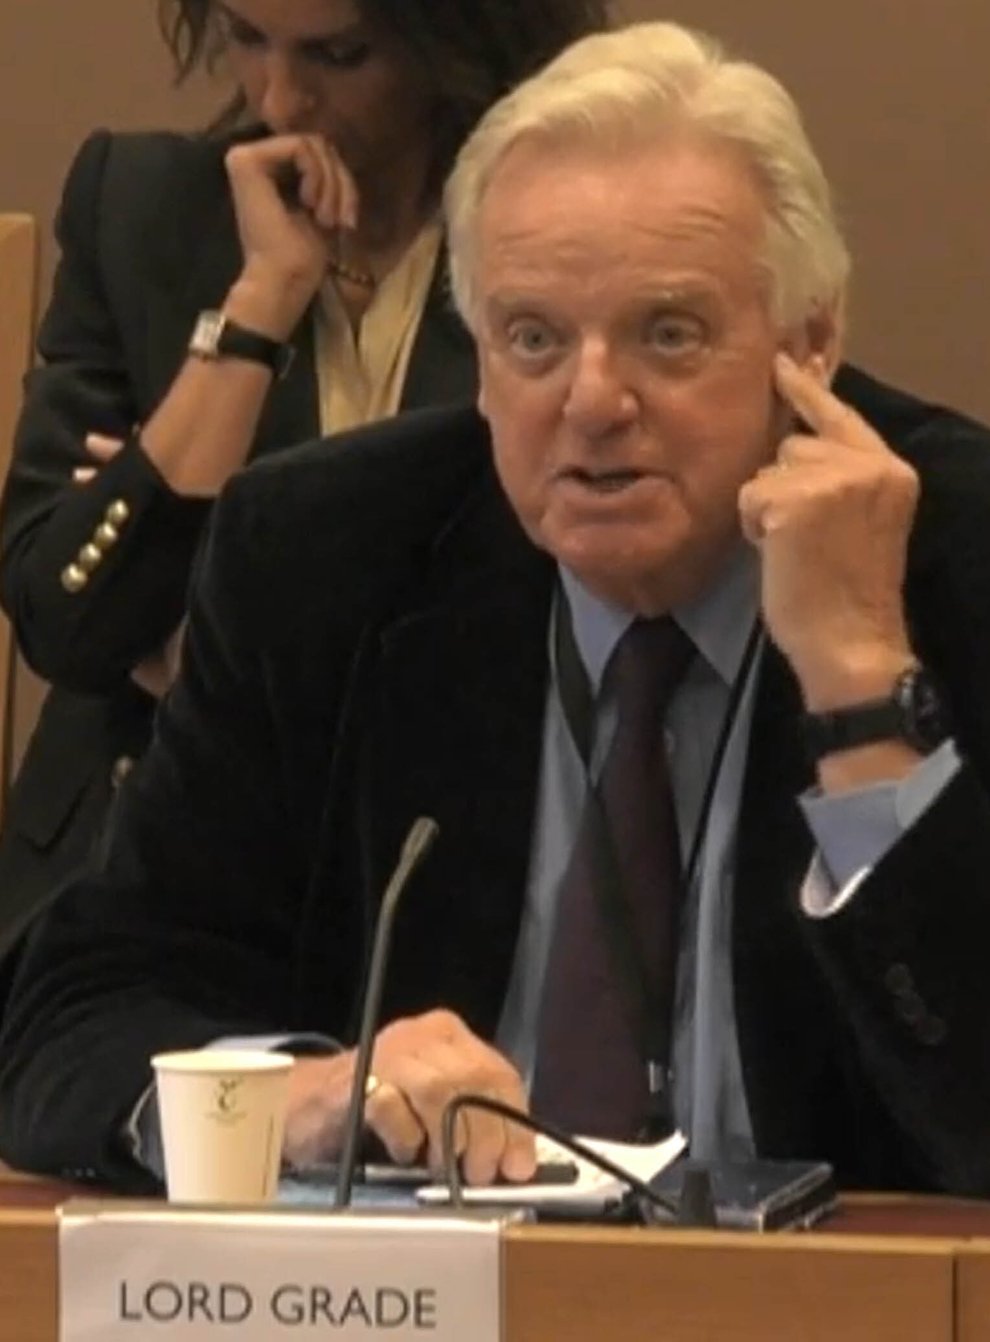 New Ofcom chairman Lord Grade is appearing before the Digital, Culture, Media and Sport Committee for ‘pre-appointment scrutiny’ (House of Lords/PA)